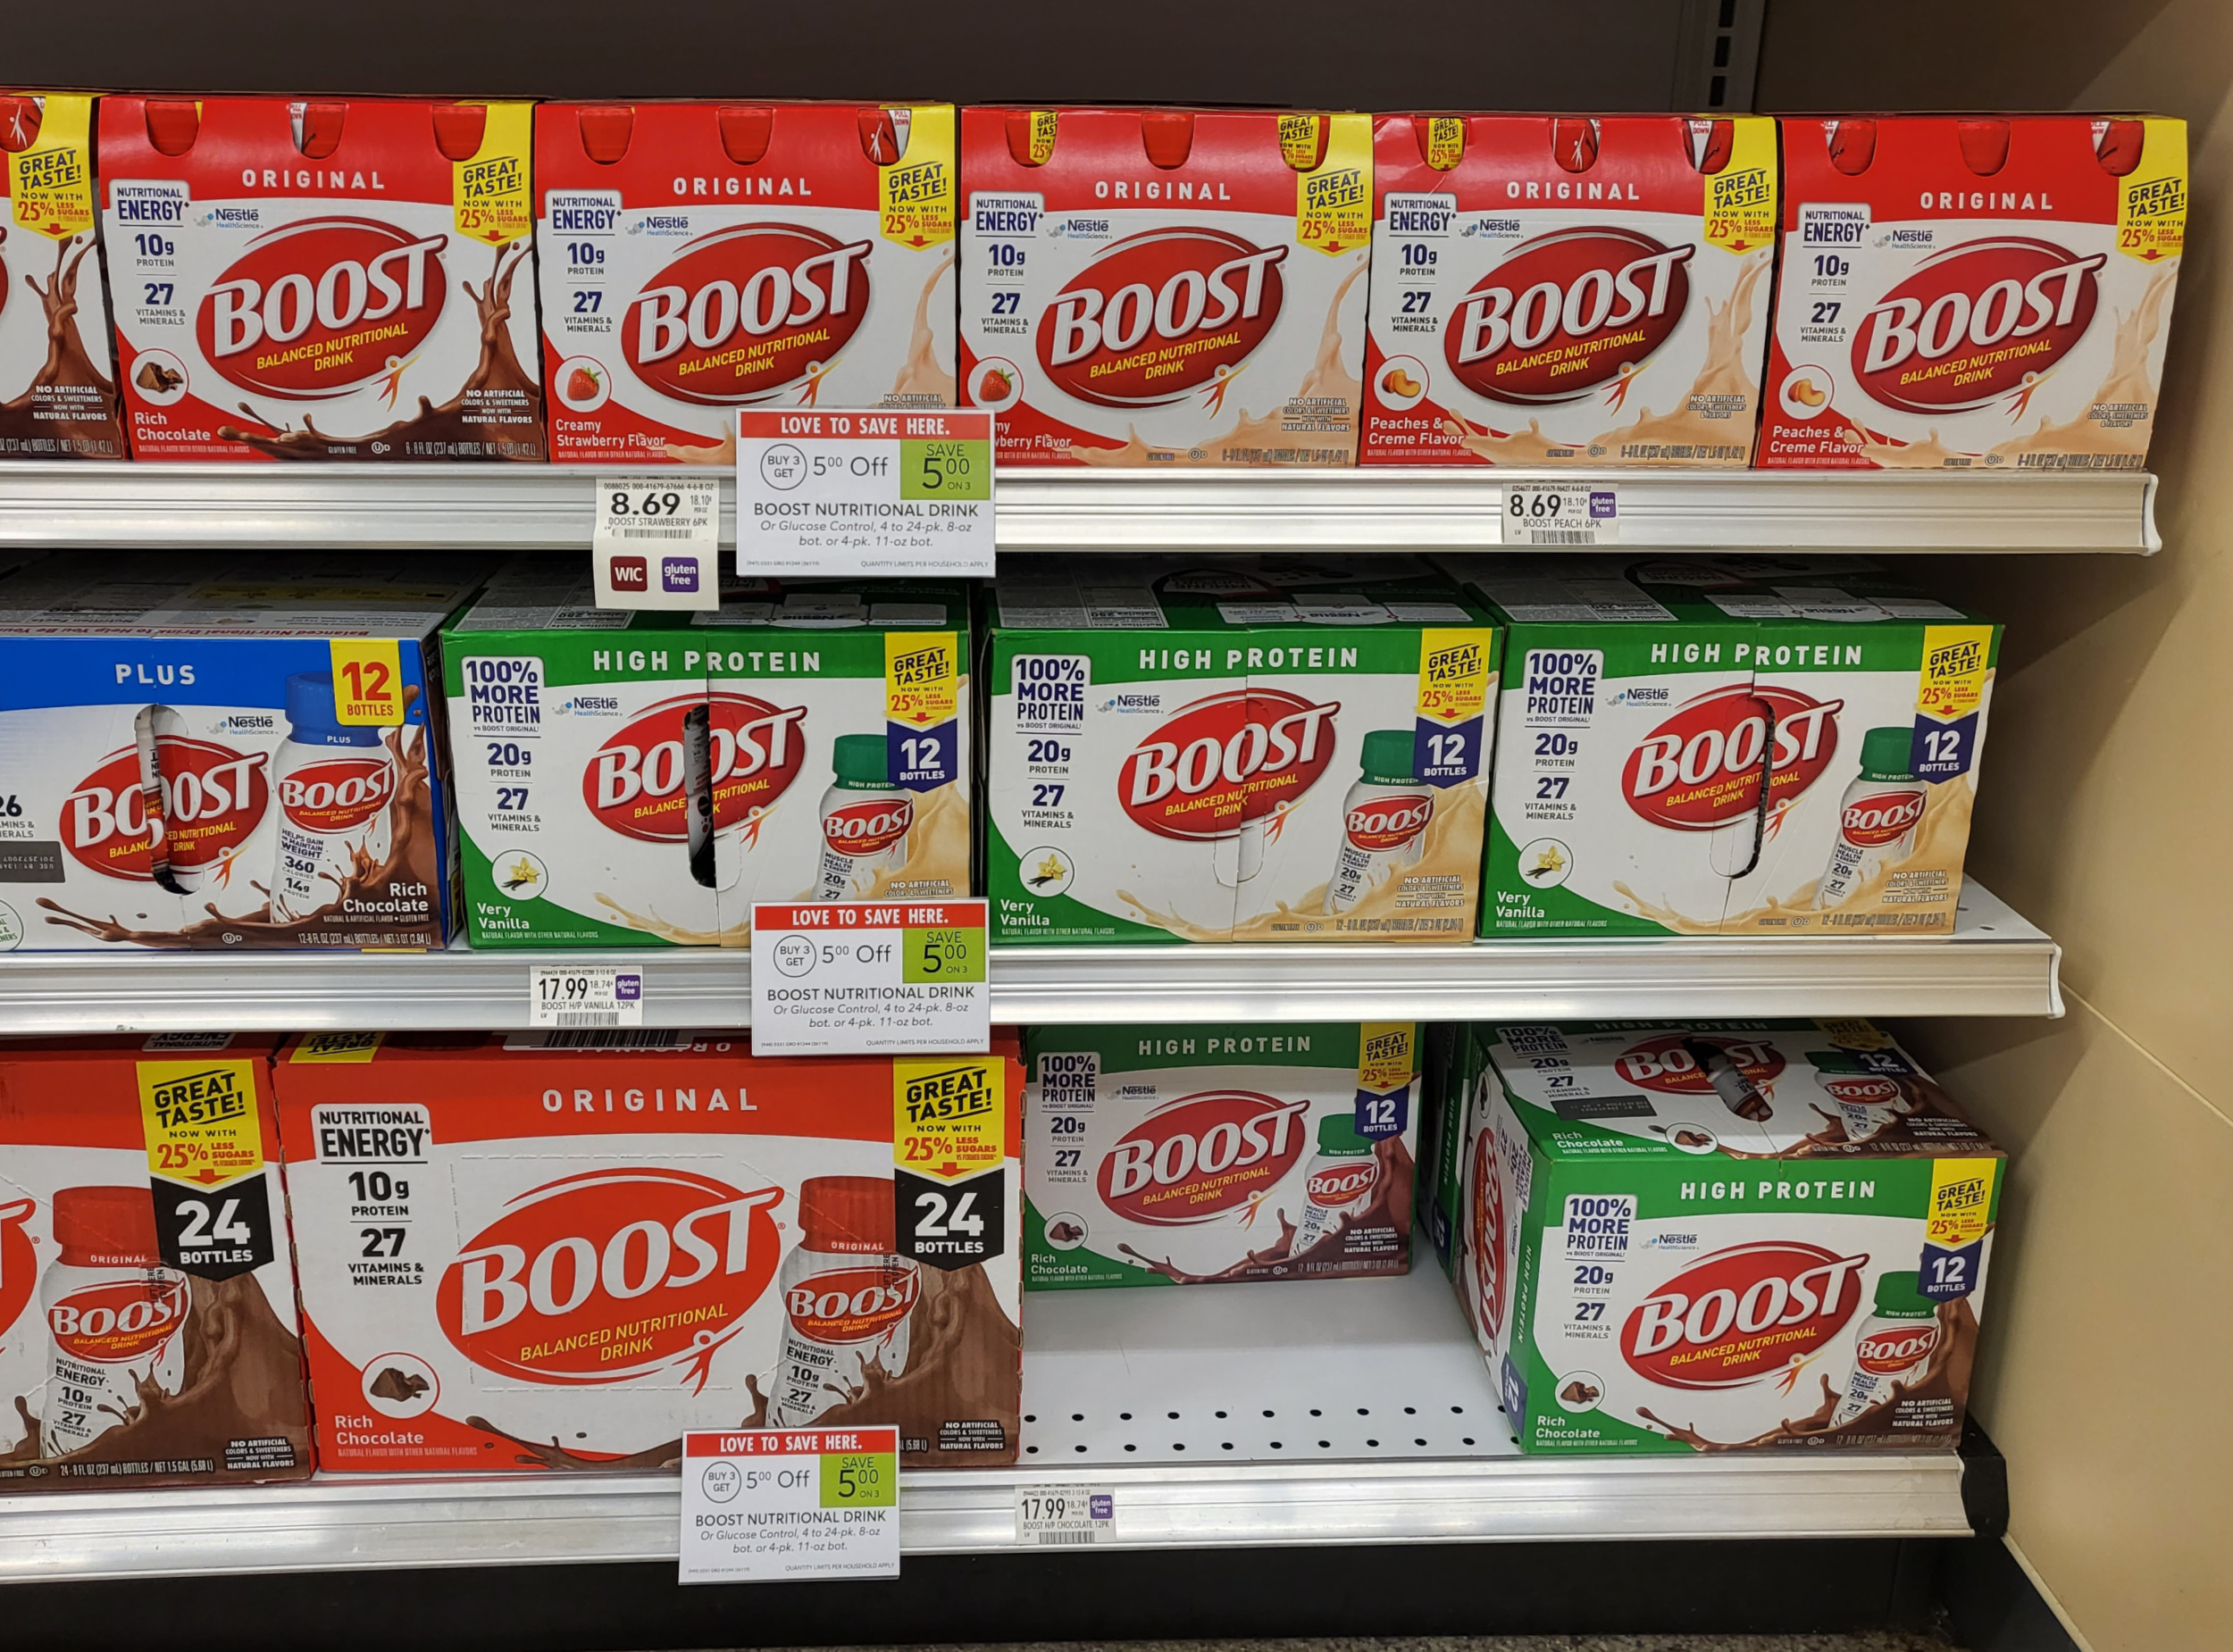 new-boost-nutritional-drinks-coupon-for-the-publix-sale-iheartpublix